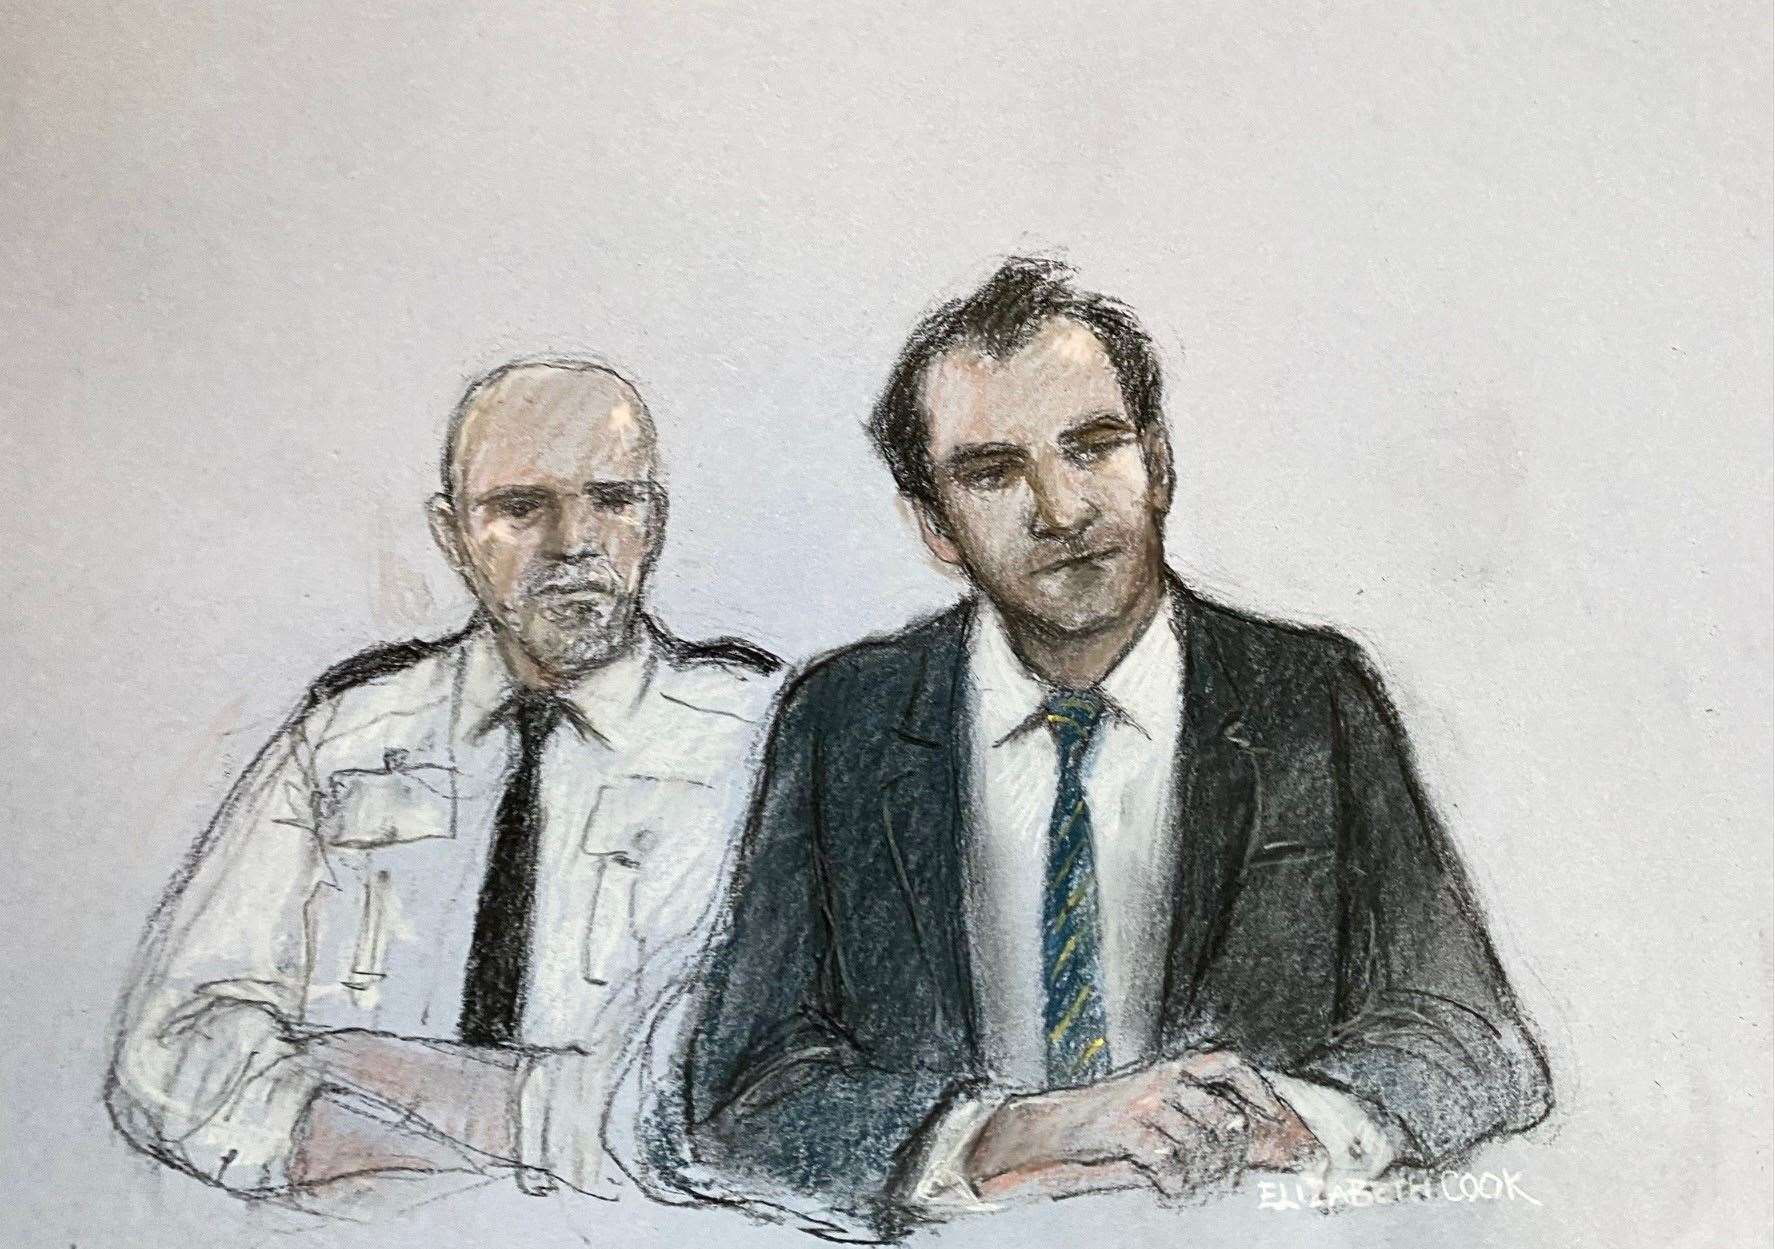 Court artist drawing of Reed Wischhusen, who is on trial at Bristol Crown Court accused of possessing explosives, firearms and ammunition (Elizabeth Cook/PA)